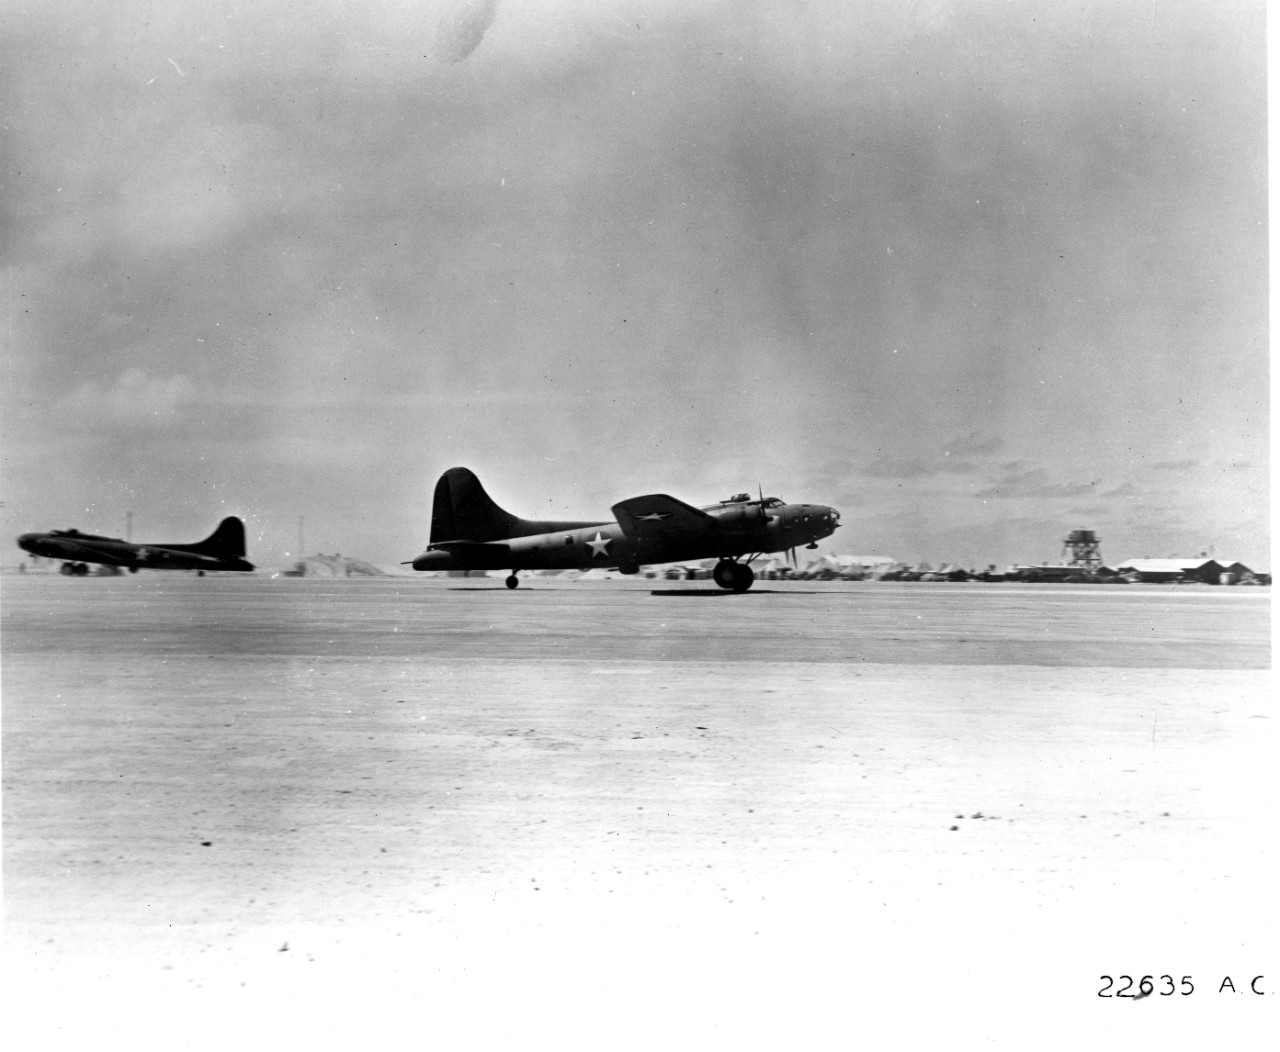 Photo #: USAF 22635 AC  Battle of Midway, June 1942